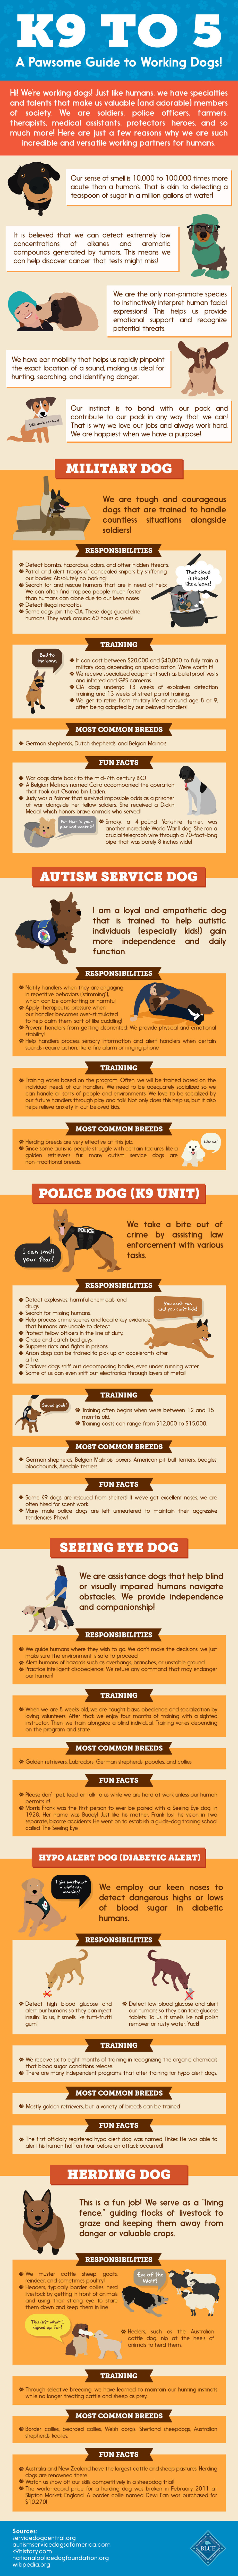 K9 to 5: A Pawsome Guide to Working Dogs